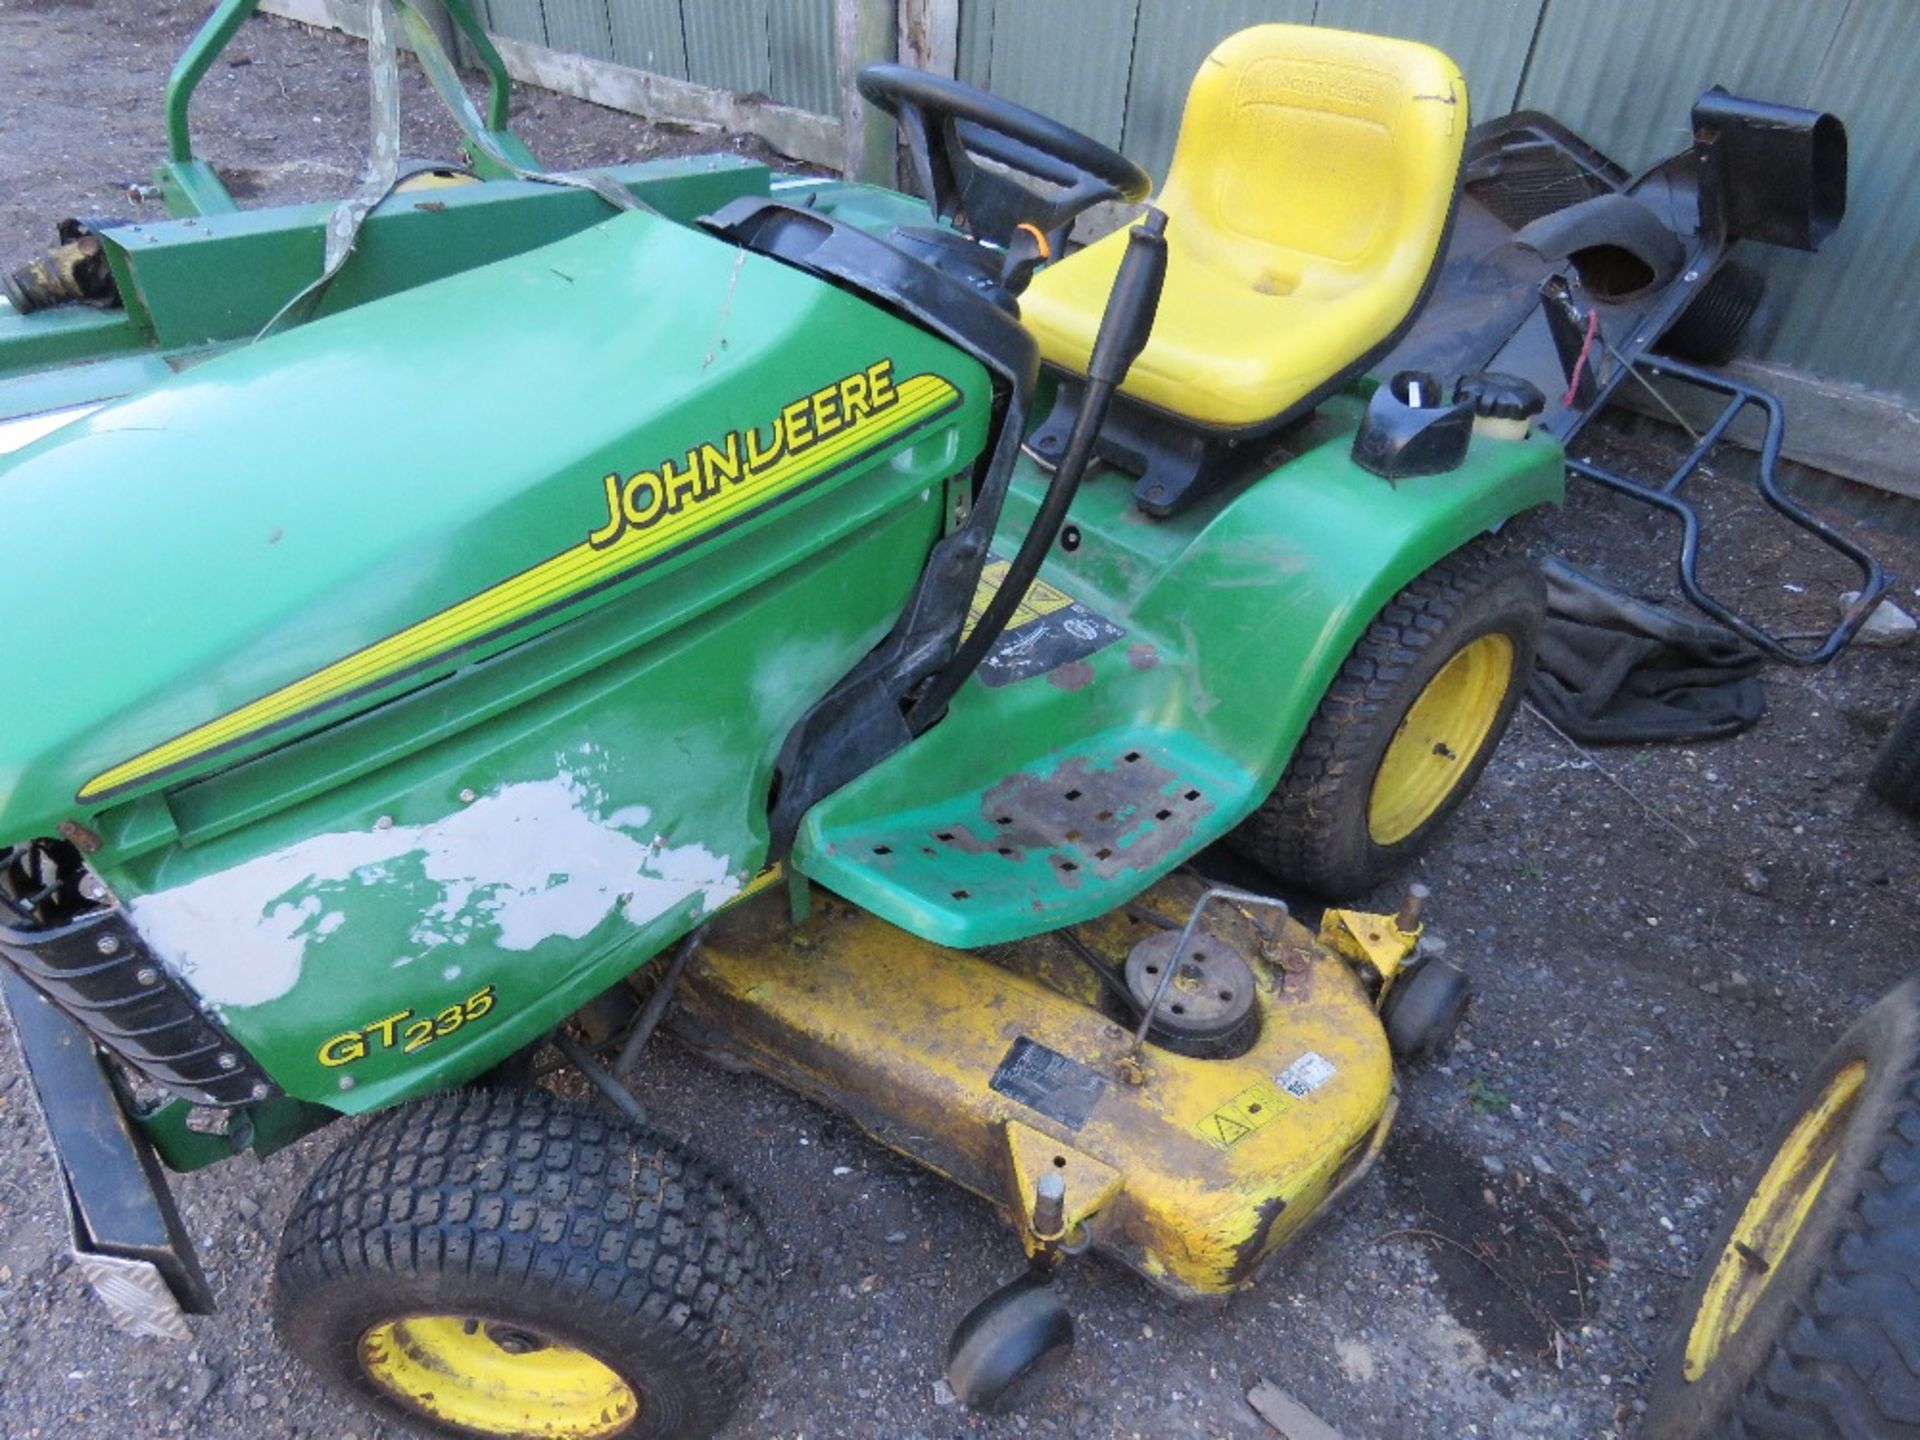 JOHN DEERE GT235 PETROL RIDE ON MOWER WITH REAR COLLECTOR, YEAR 2002 BUILD. - Image 3 of 7